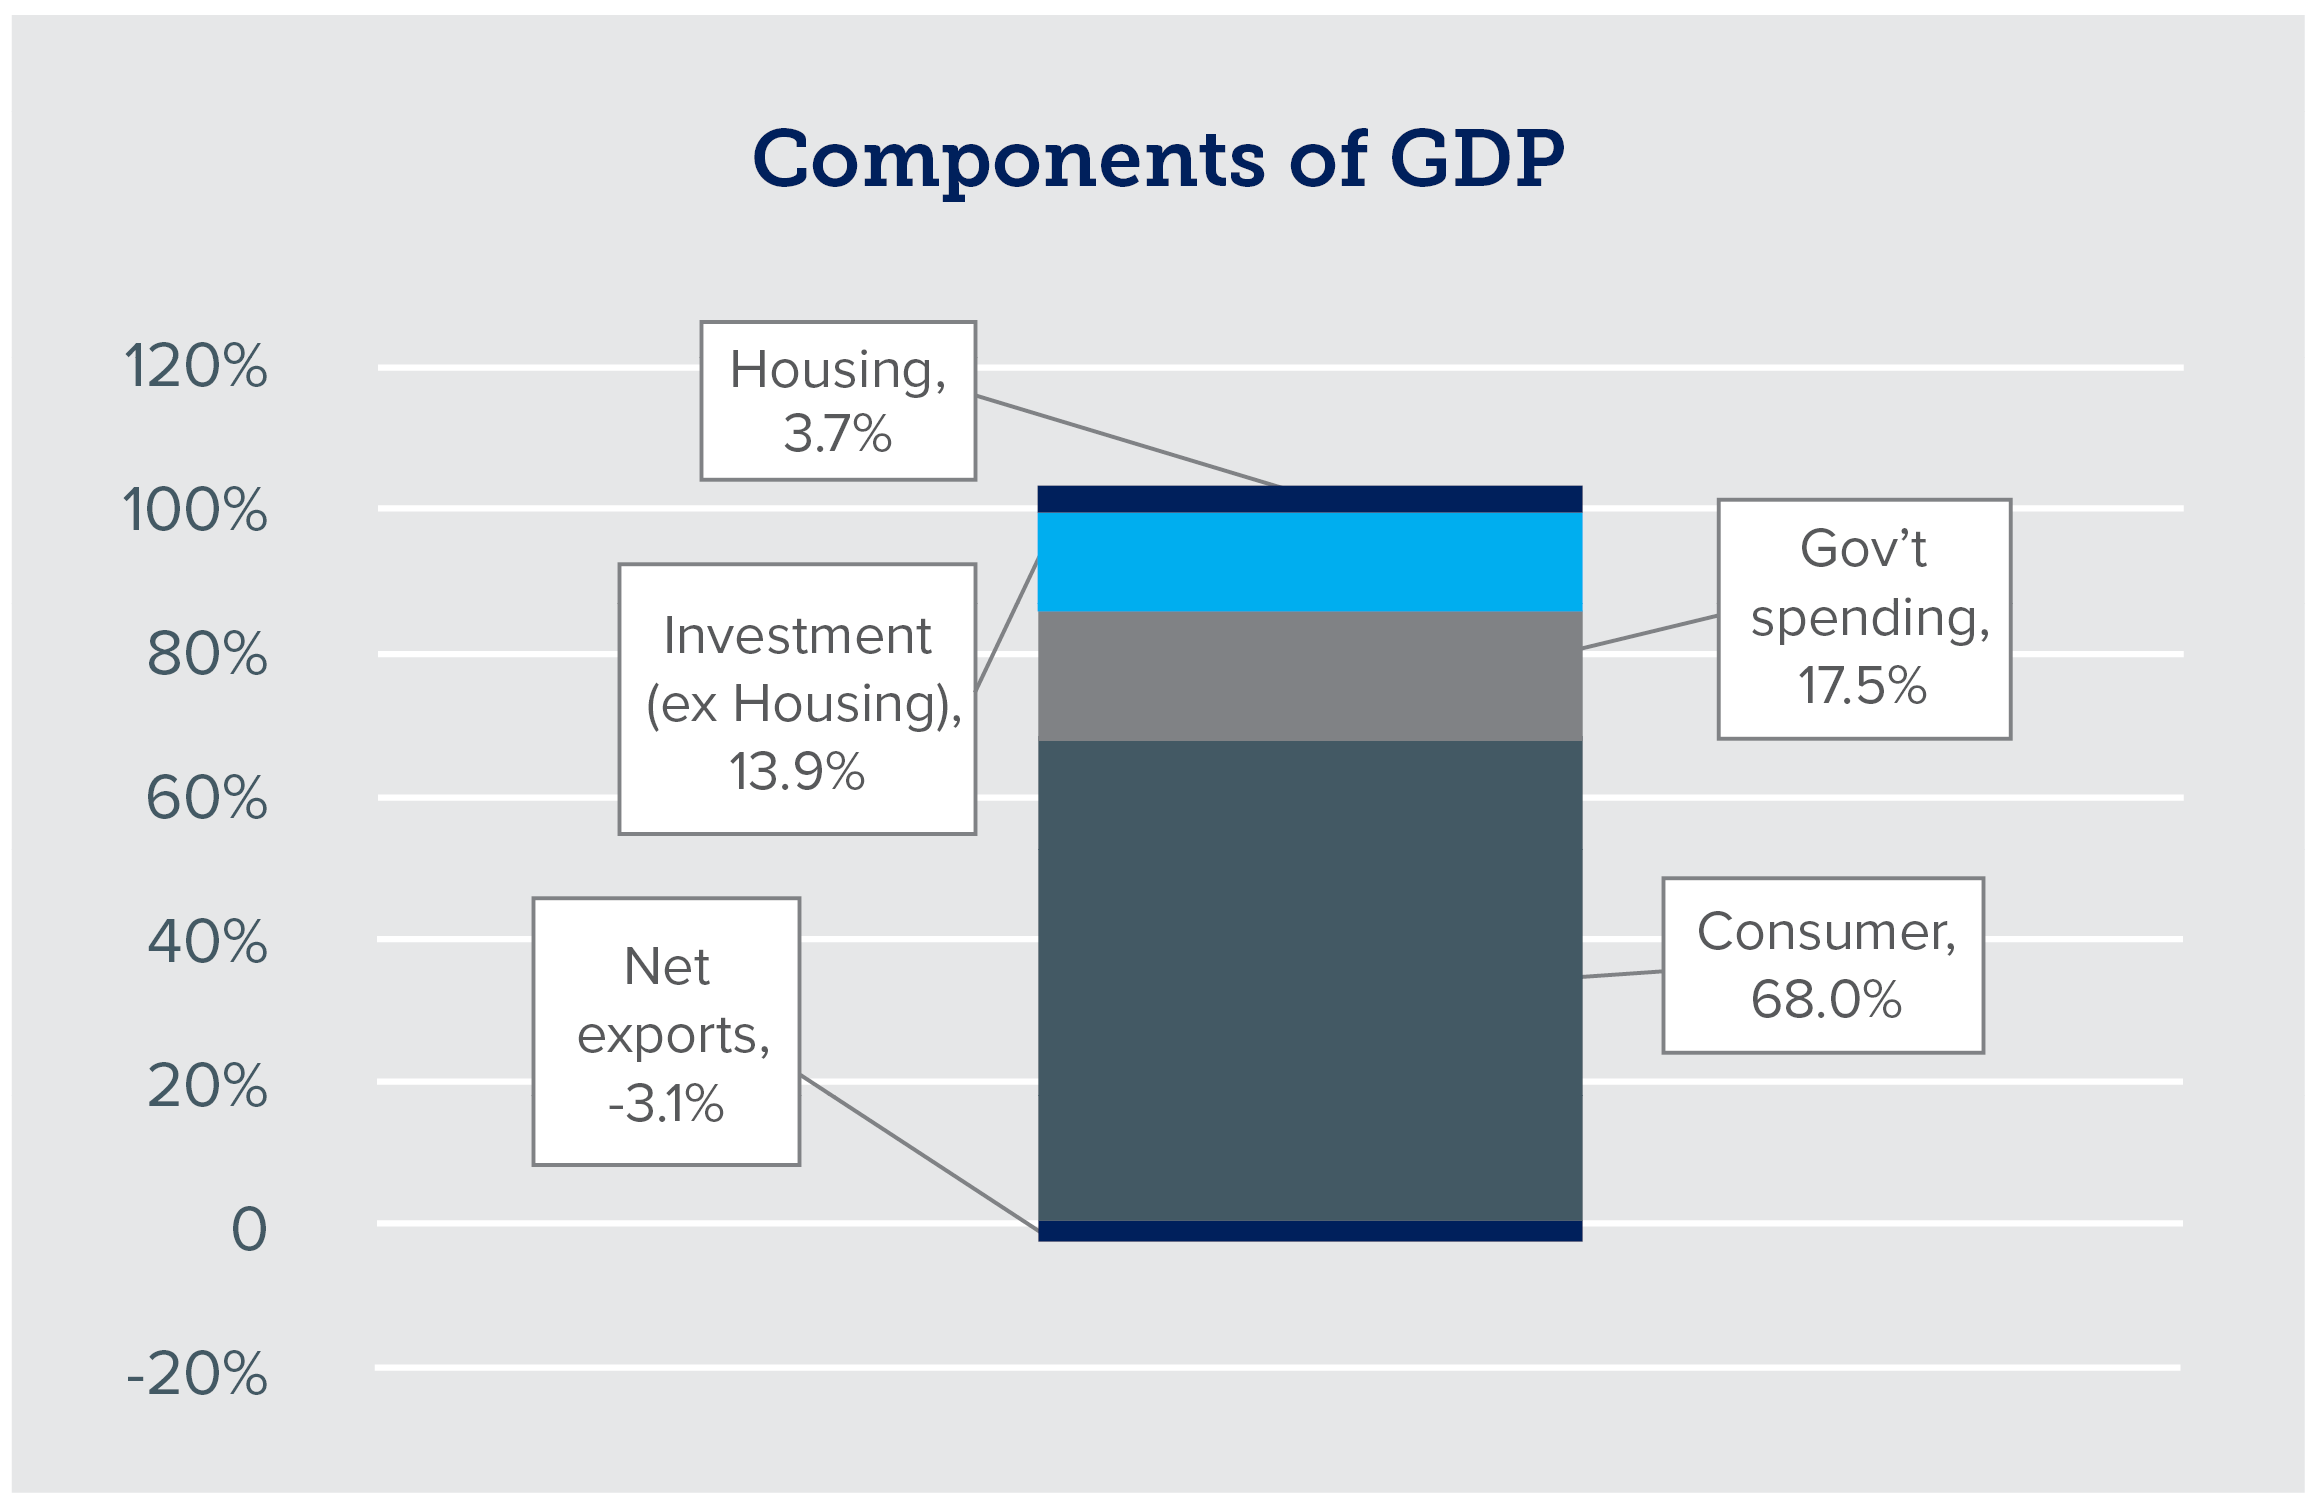 Bar graph of components of GDP